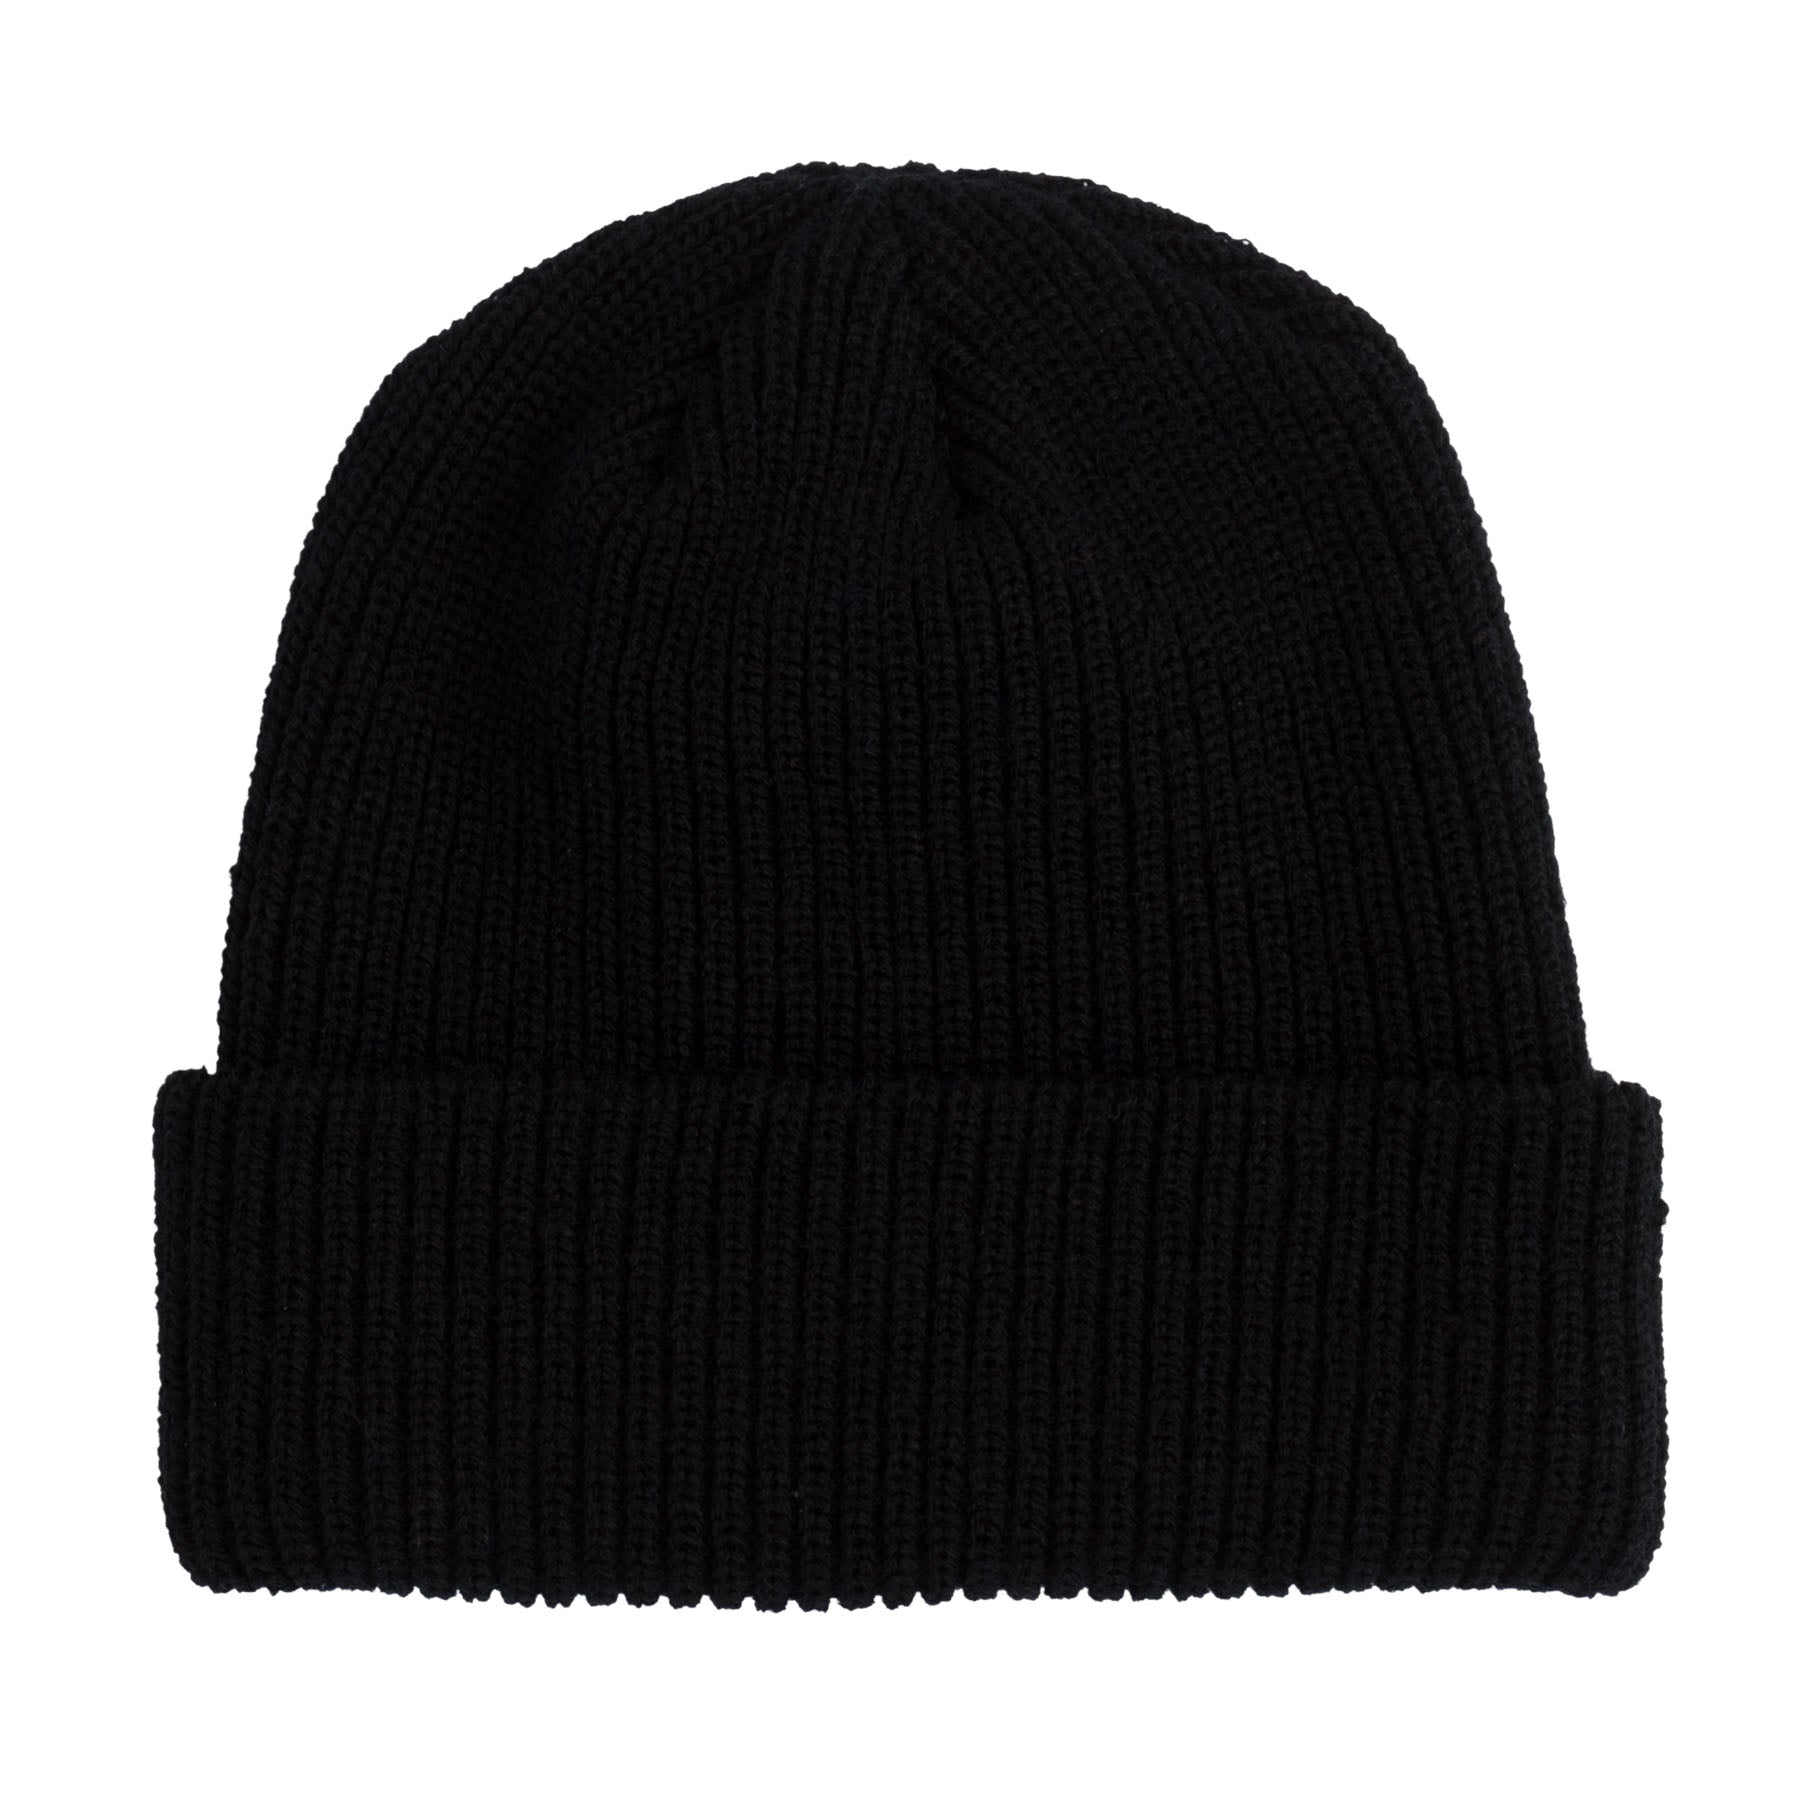 Independent FTR Barcode Beanie Long Shoreman Hat Black OS Unisex - Invisible Board Shop